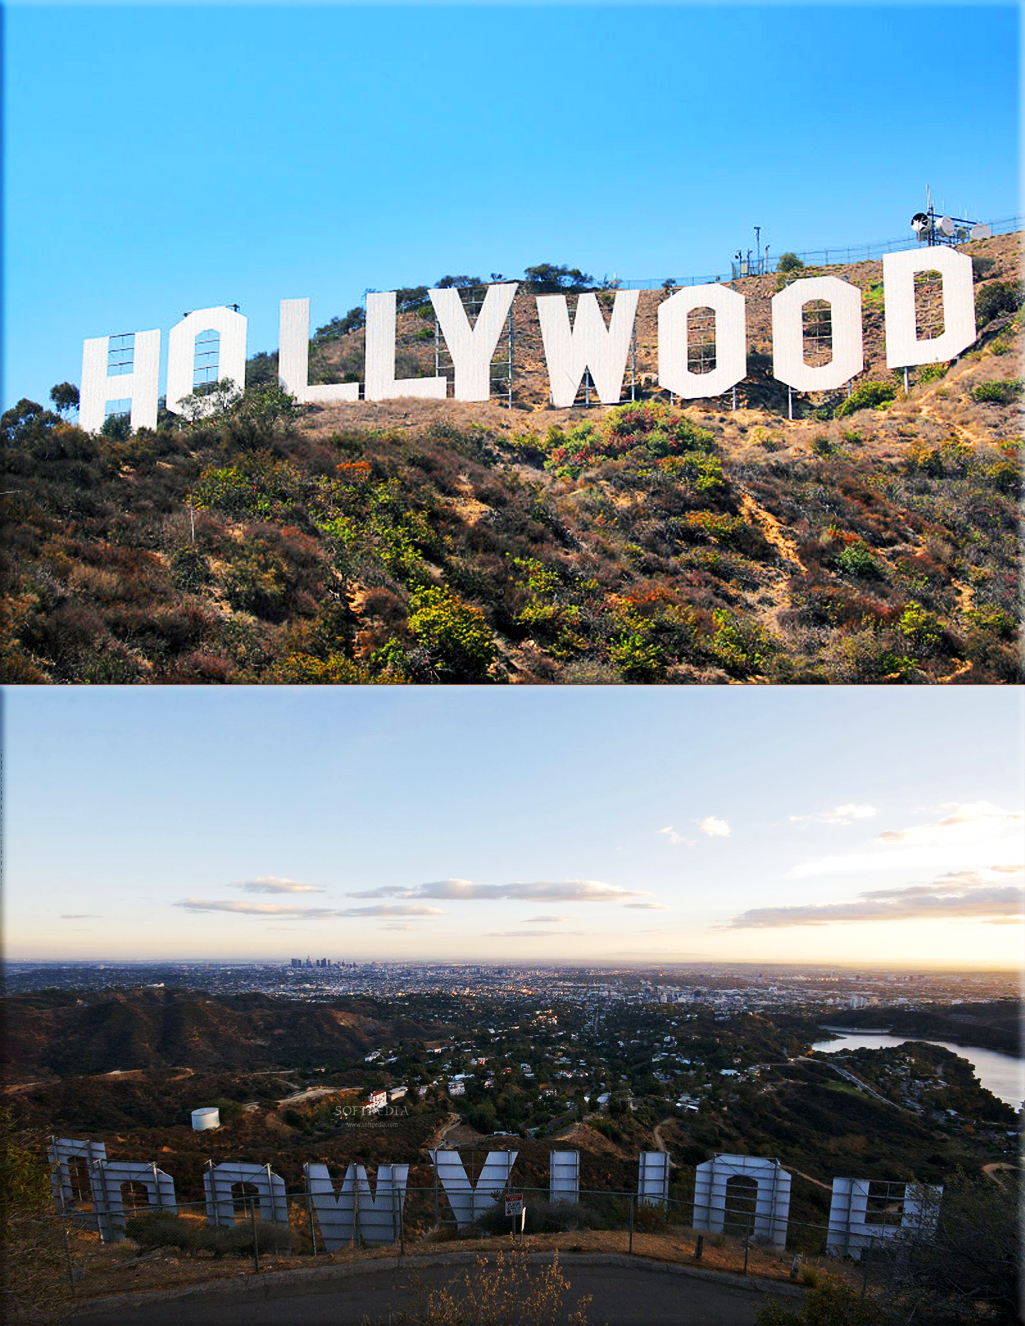 The Hollywood Sign is officially dedicated in the hills above Hollywood, Los Angeles